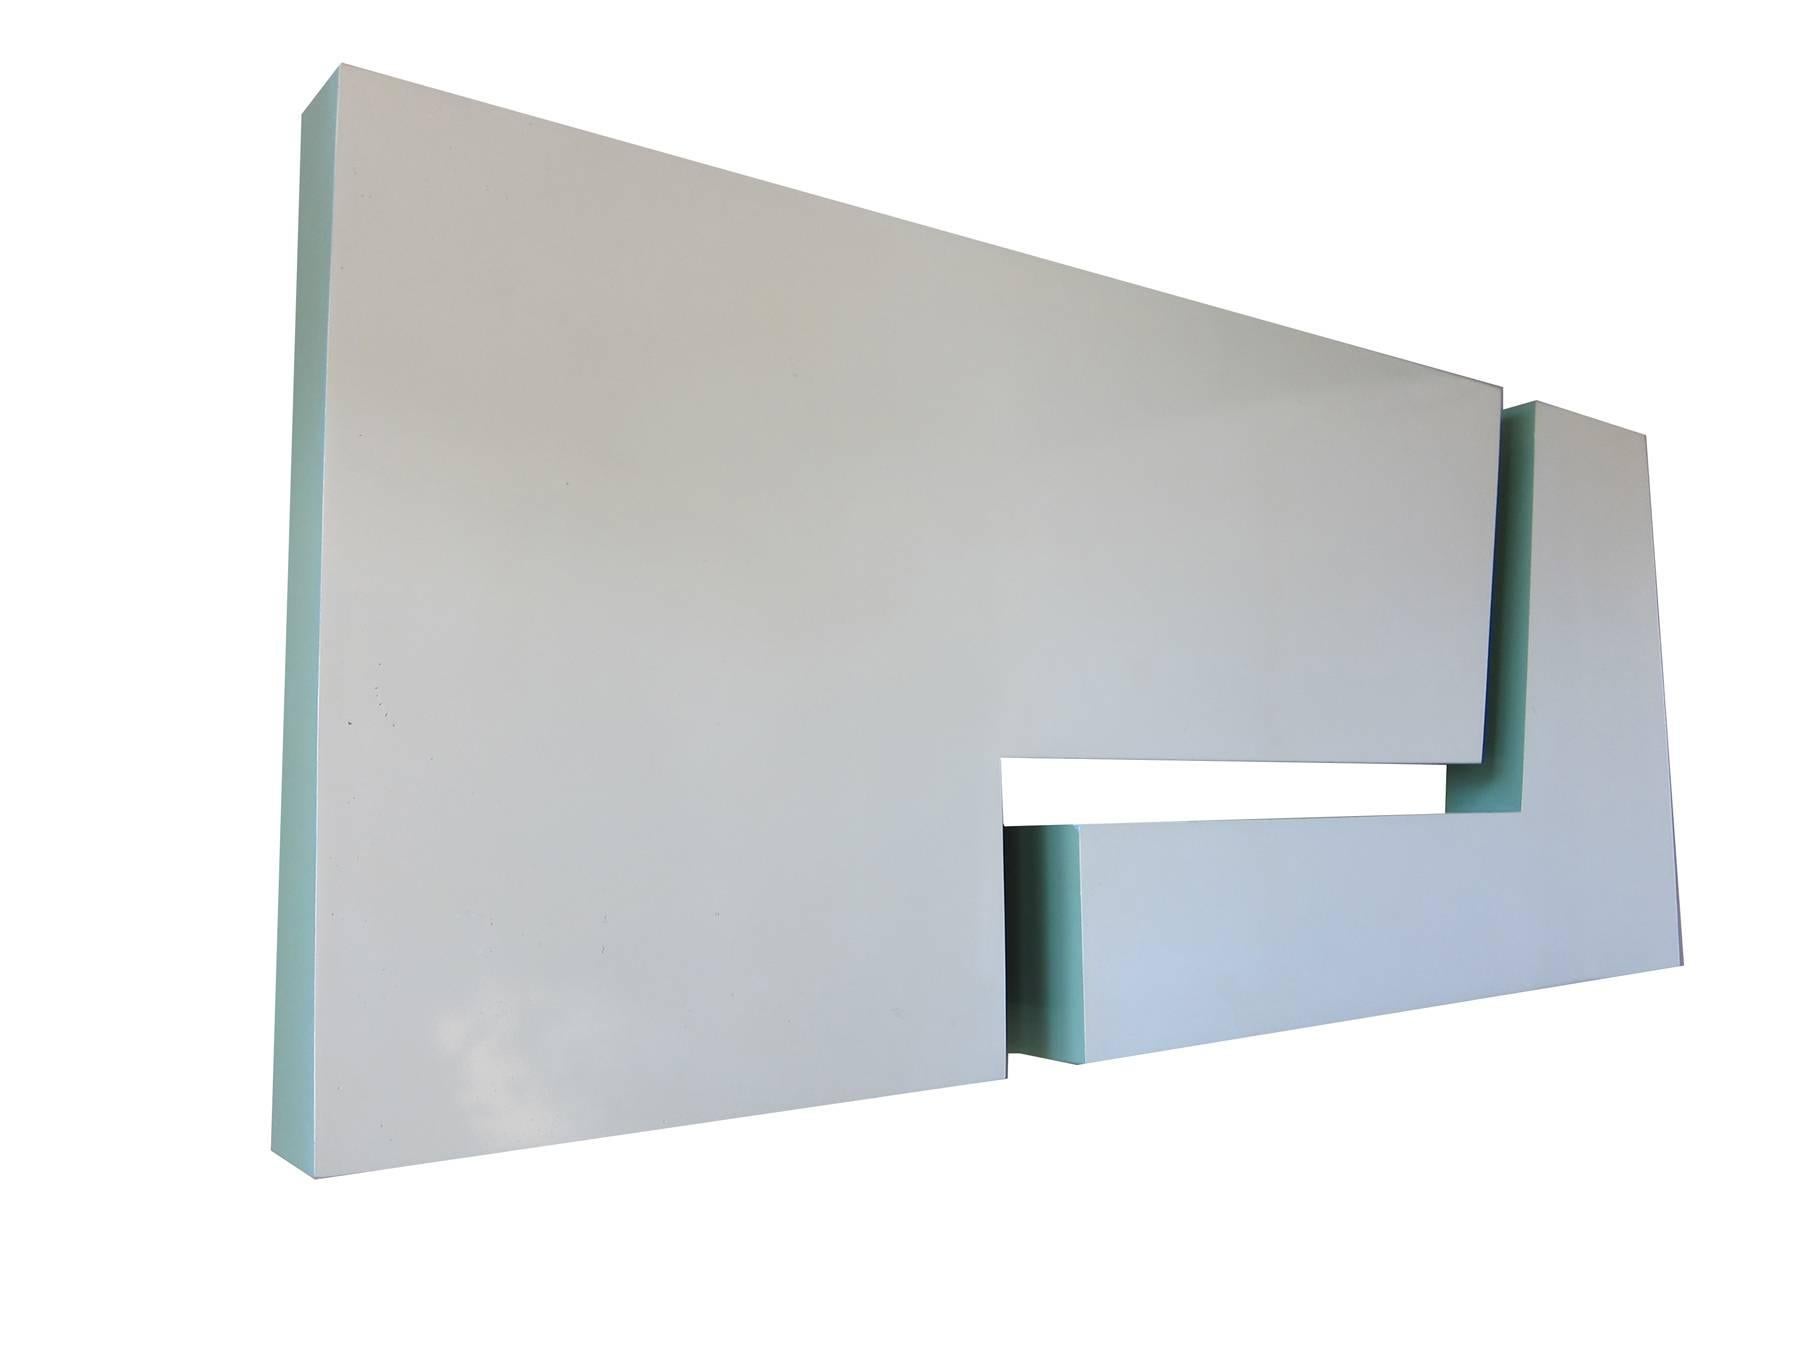 Large, two-piece modular sculpture created by Richard K. Schwartz, circa 1974. Geometric shapes hang flush to wall and are of two tones, sea foam fronts with darker green sides. They are comprised of painted lacquer over composite foam. Sculpture